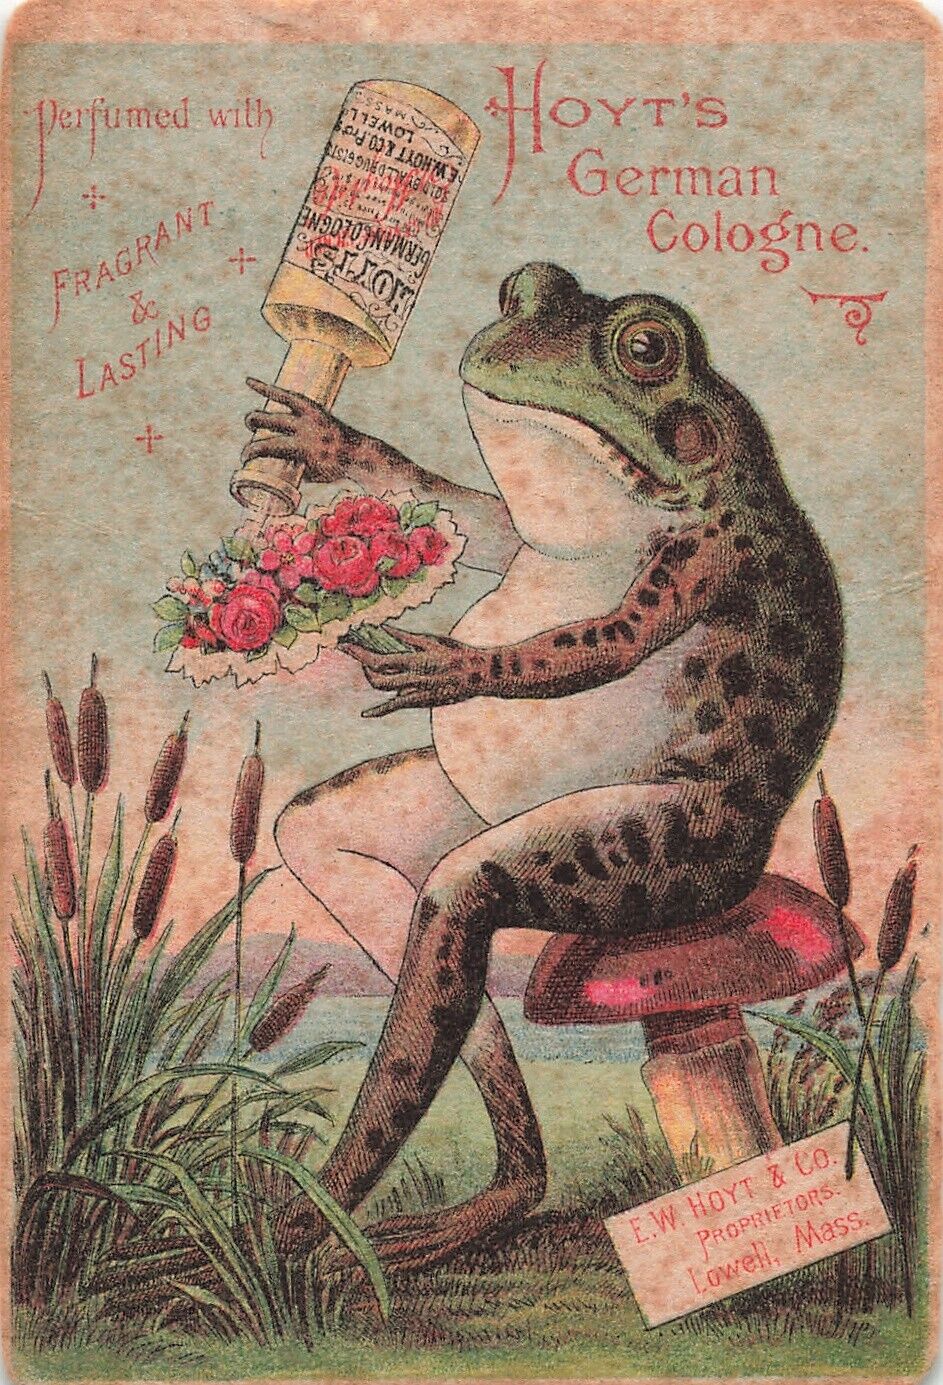 Anthropomorphic Frog Victorian Trade Card c1880s FW Hoyt German Cologne  *Ab9c